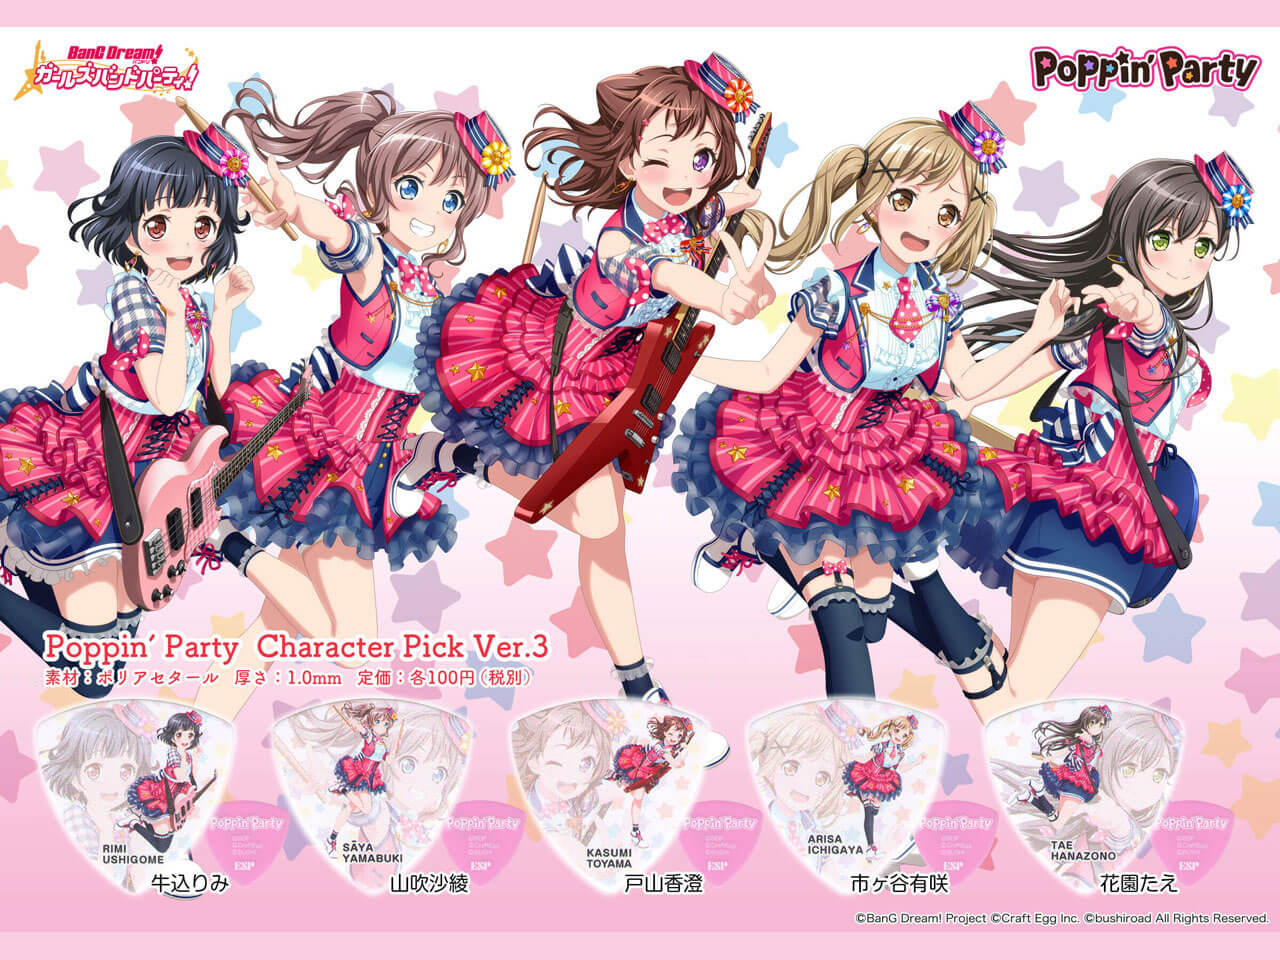 【ESP×BanG Dream!コラボピック】Poppin’Party Character Pick Ver.3 "山吹沙綾"10枚セット（GBP Saya Poppin Party 3）